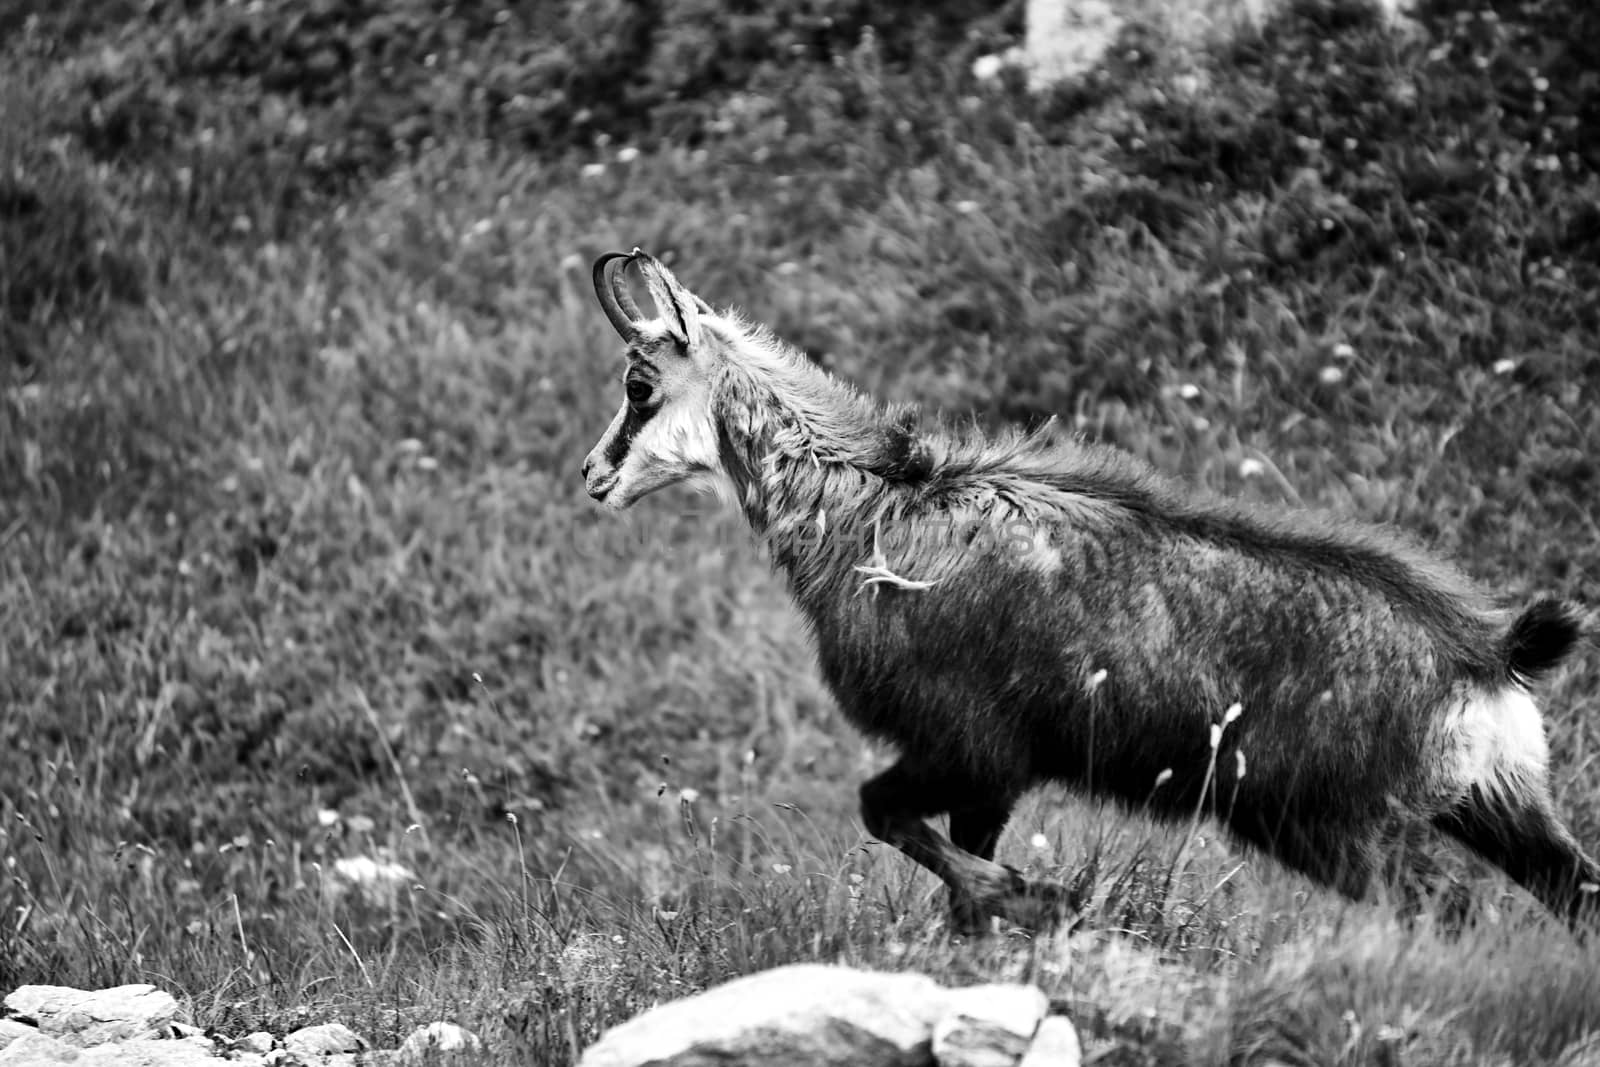 Tatra chamois in the meadow in the Tatra mountains in Poland, black and white